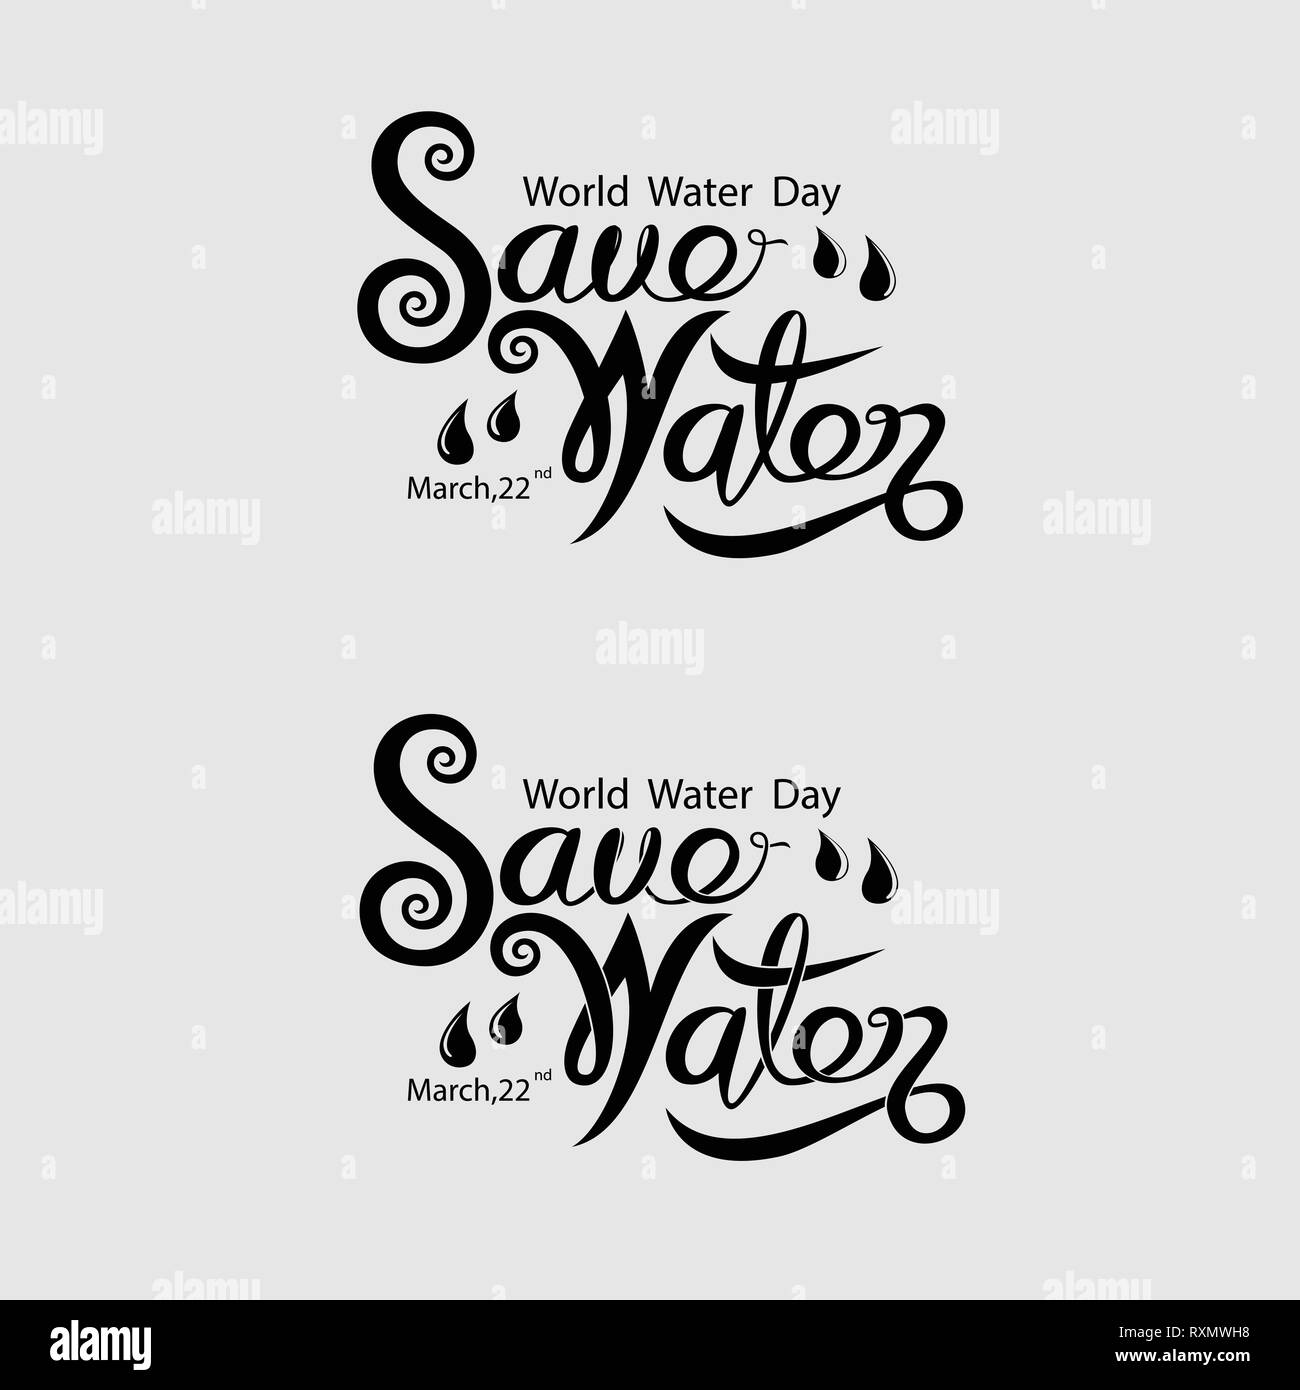 Black Save Water Typographical Design Elements.World Water Day icon.March,22.Minimalistic design for World Water Day concept.Vector illustration Stock Vector